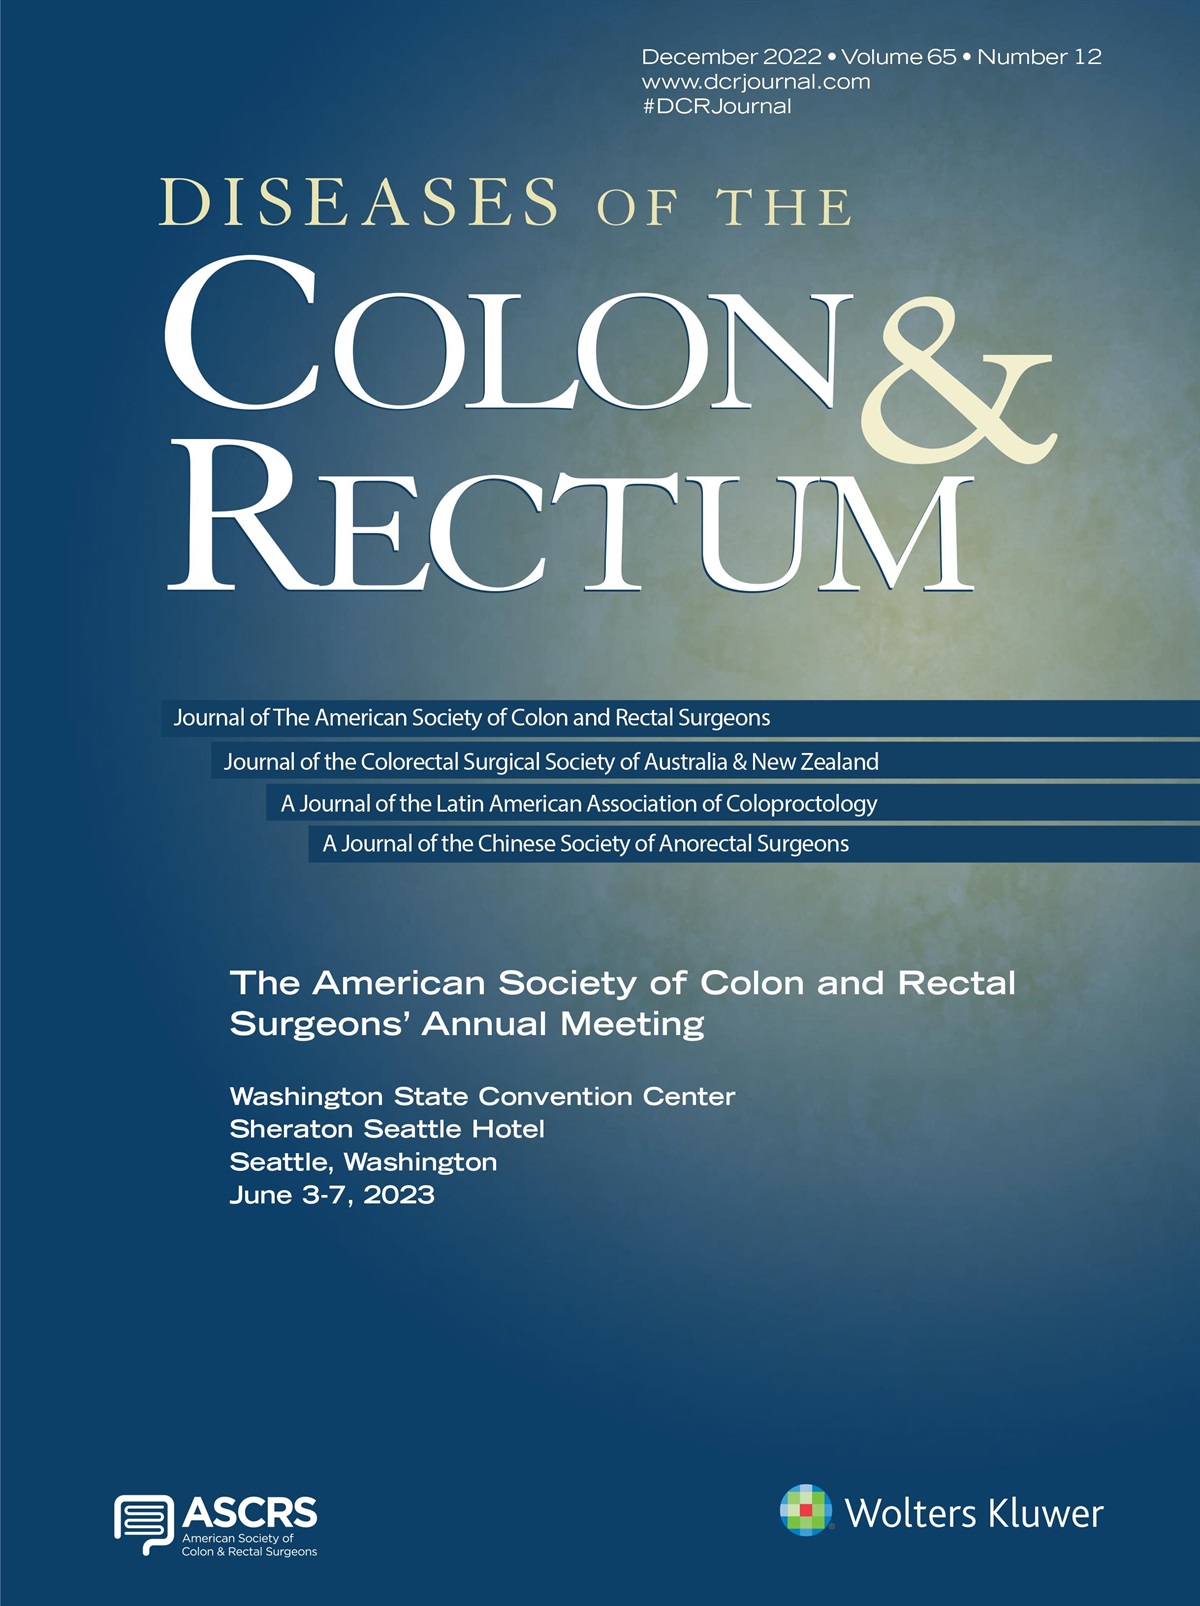 Management of Acute Colonic Pseudo-Obstruction: What to Do When the Colon Is Doing Nothing